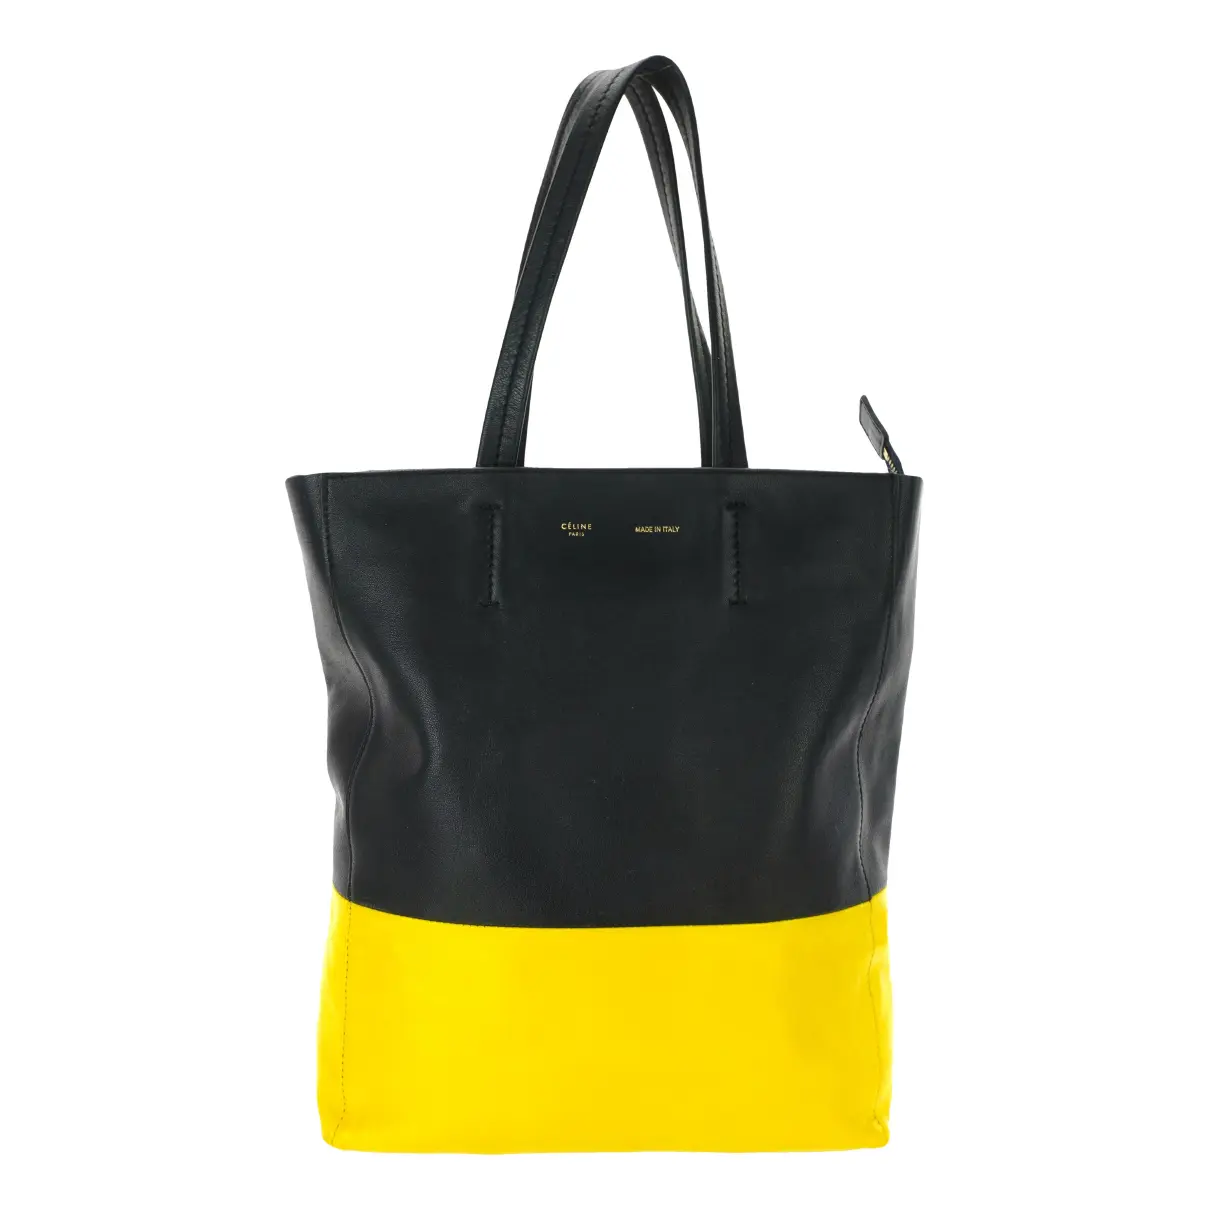 Cabas leather tote